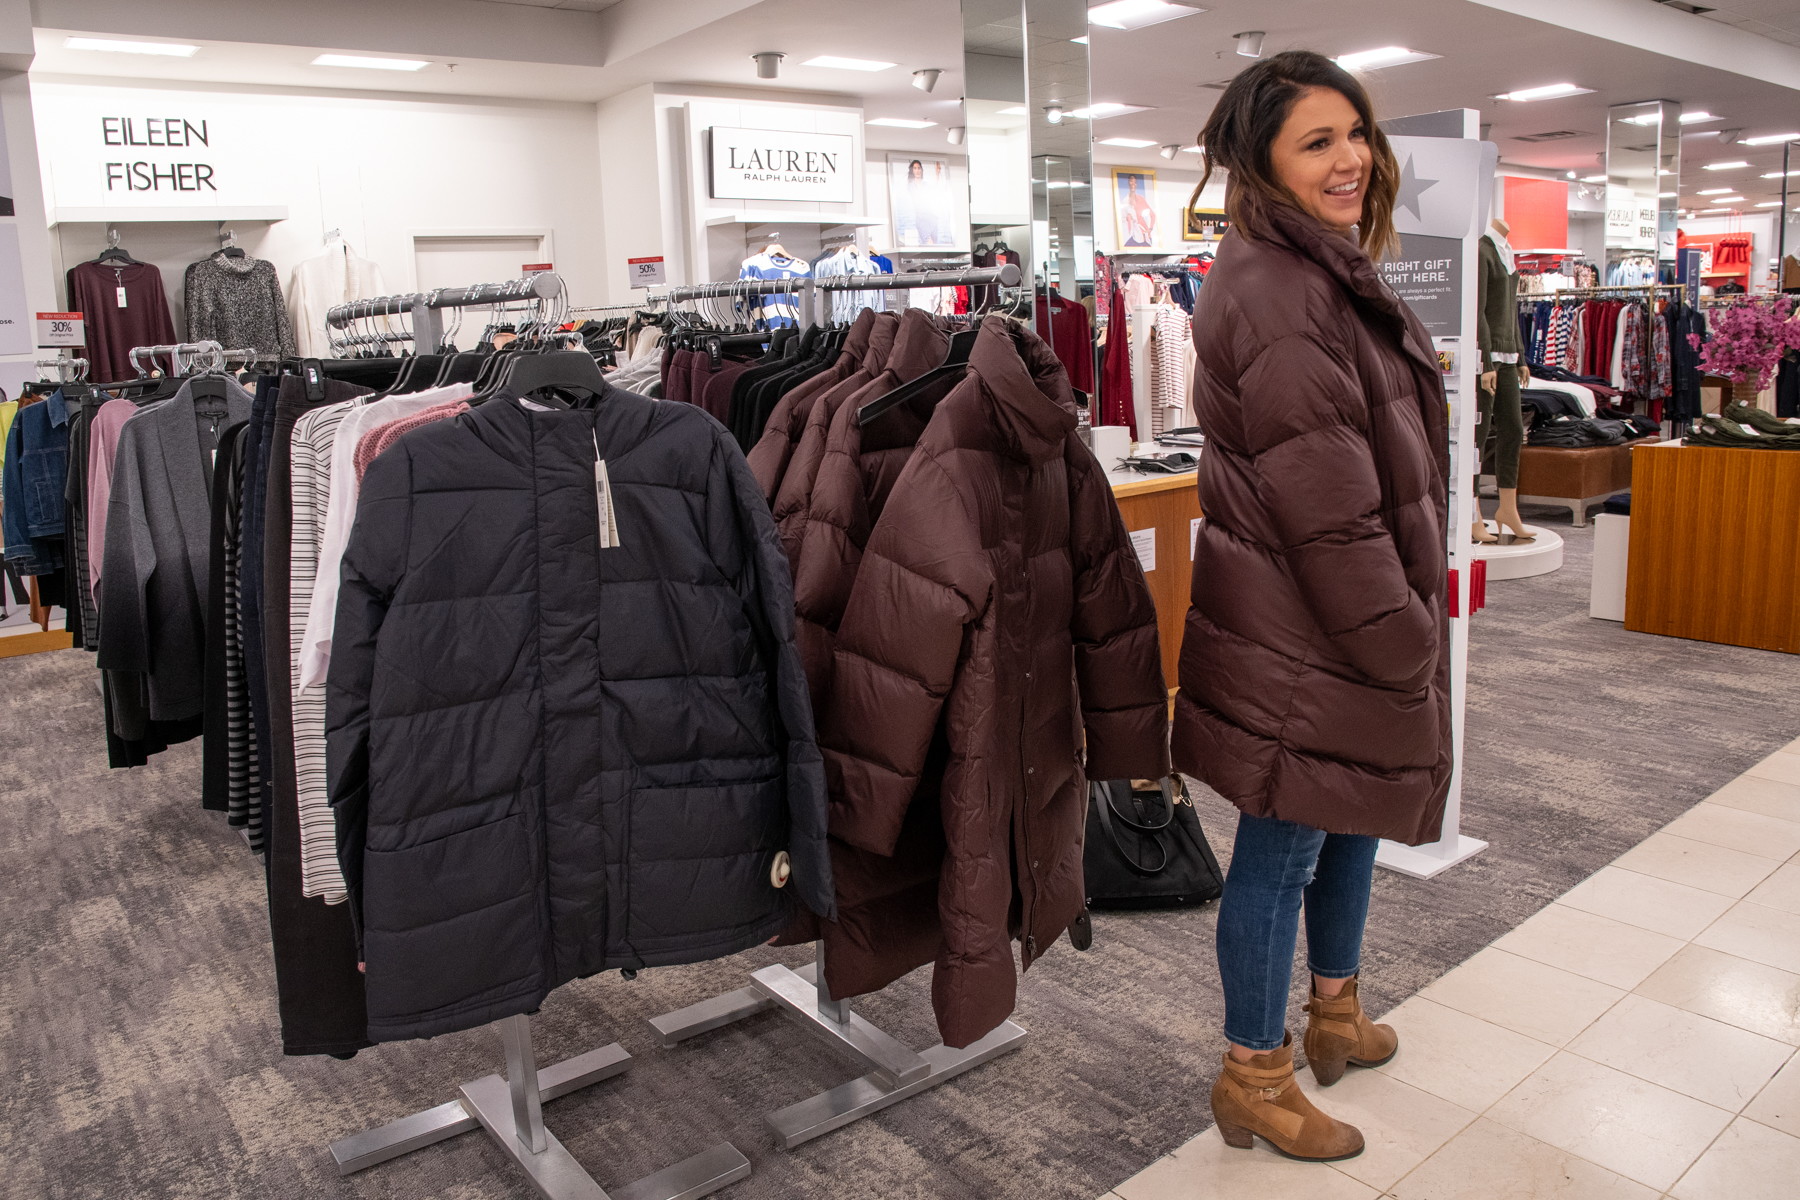 north face winter coats clearance